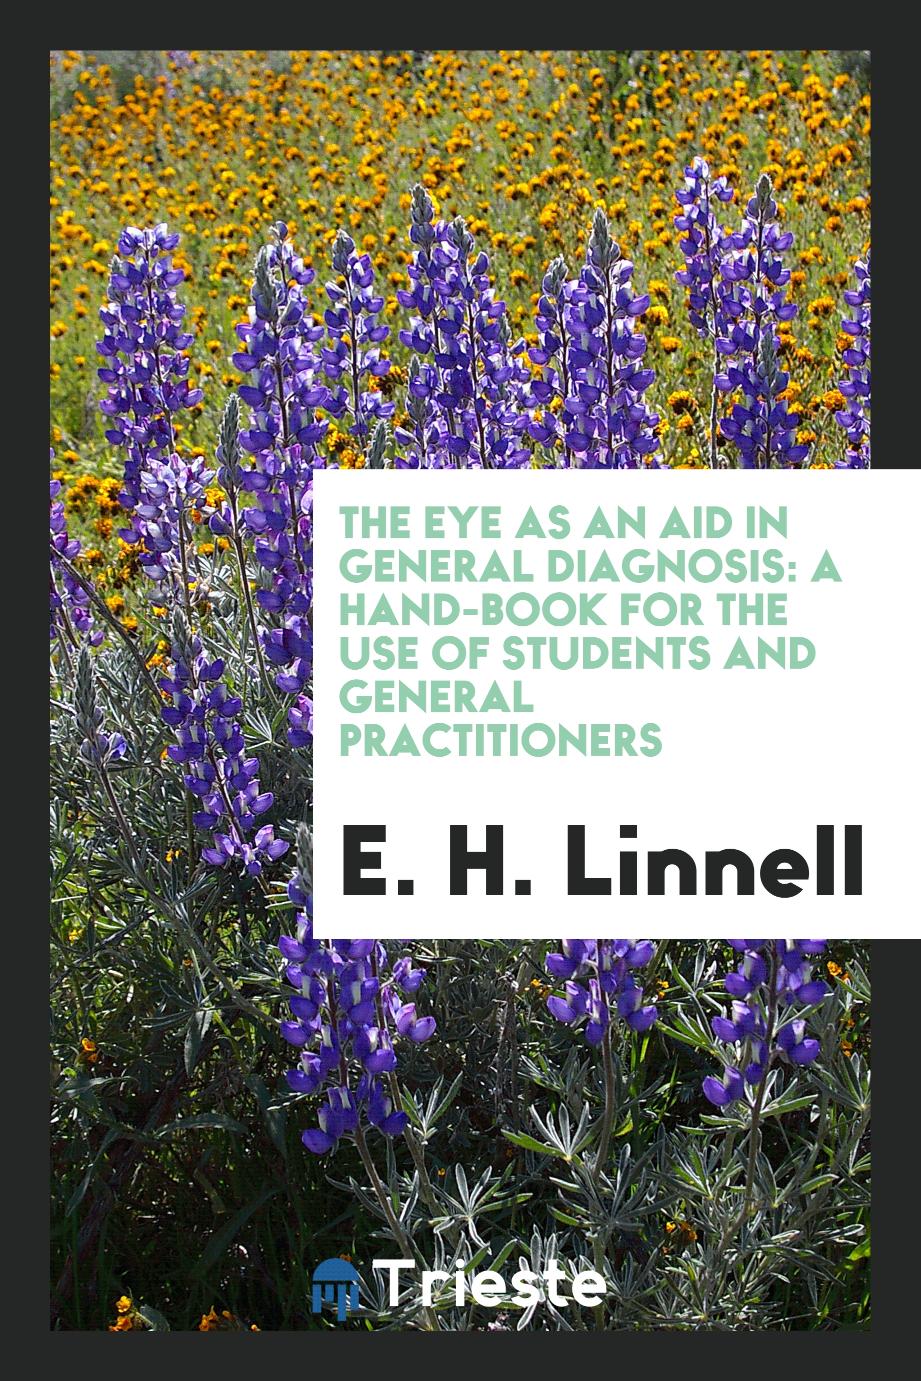 The eye as an aid in general diagnosis: a hand-book for the use of students and general practitioners